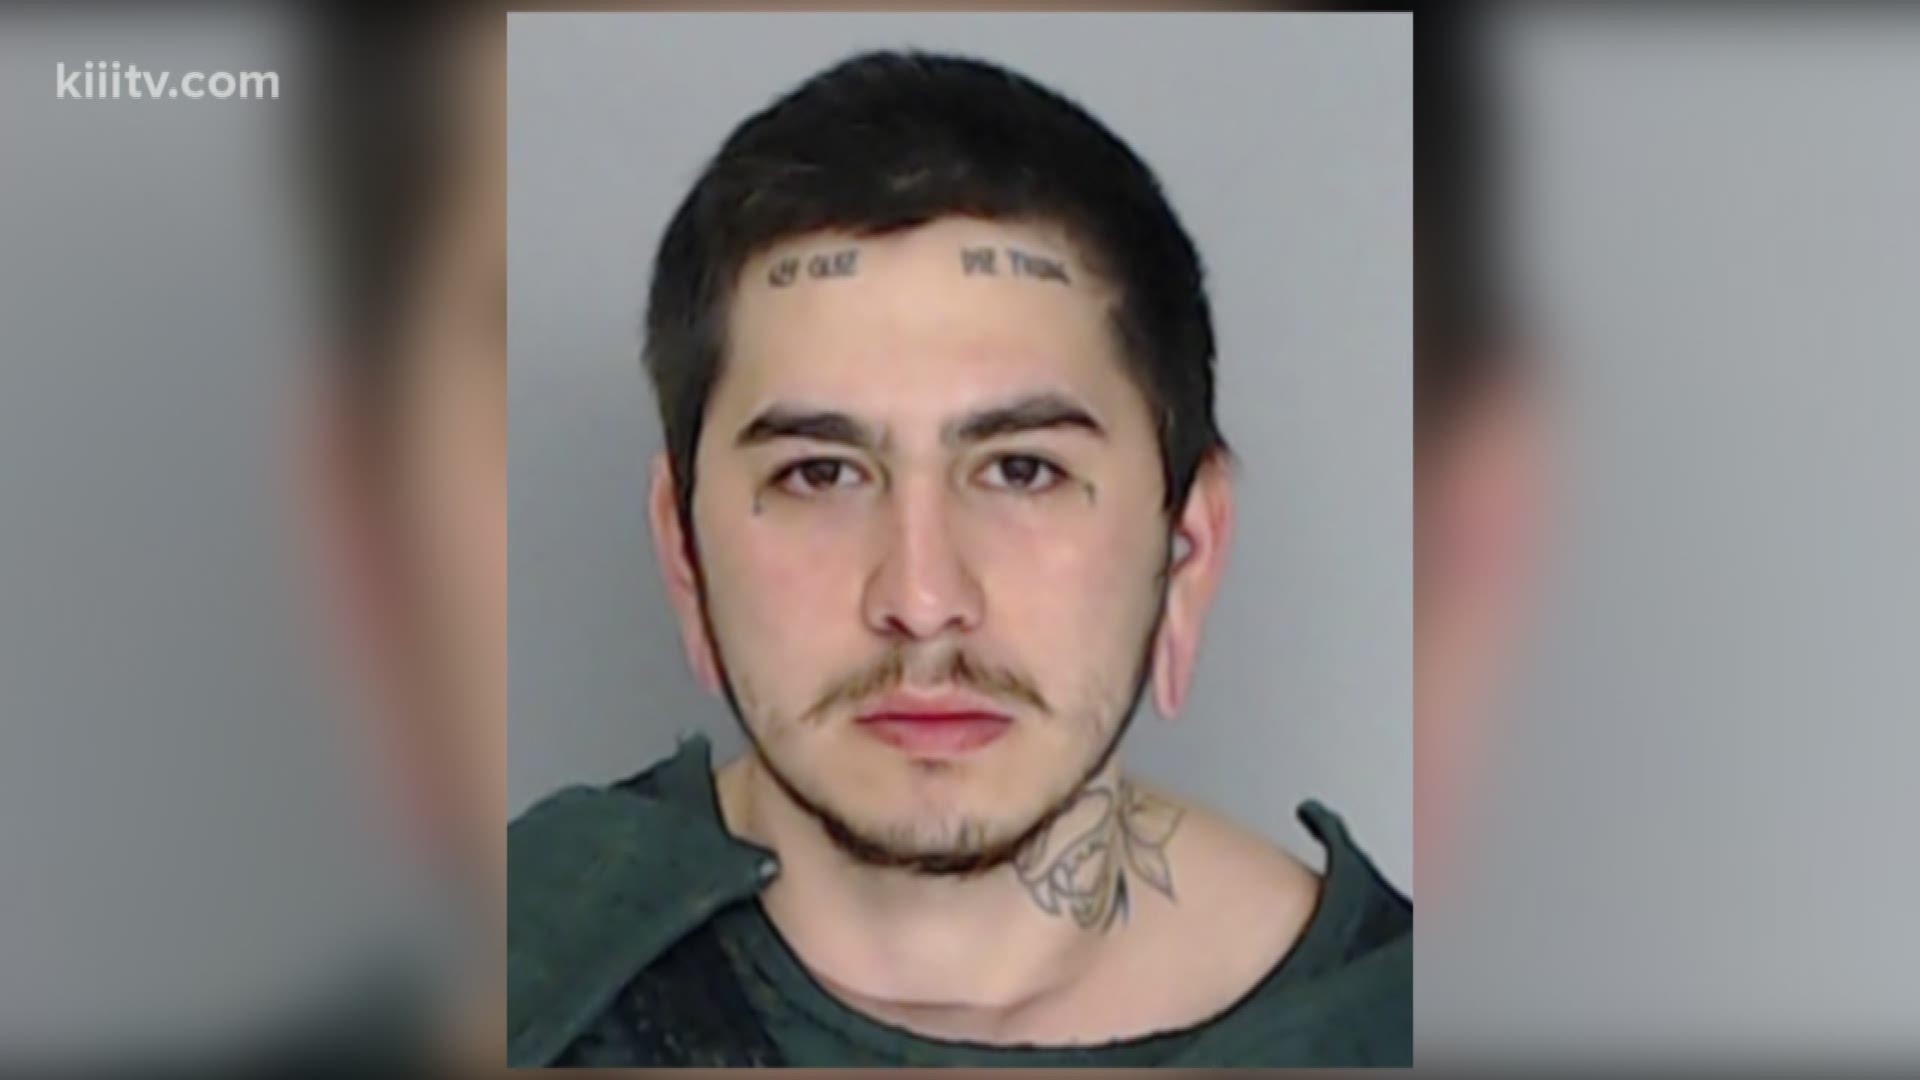 26-year-old Julian Garcia was arrested in connection with a fatal shooting